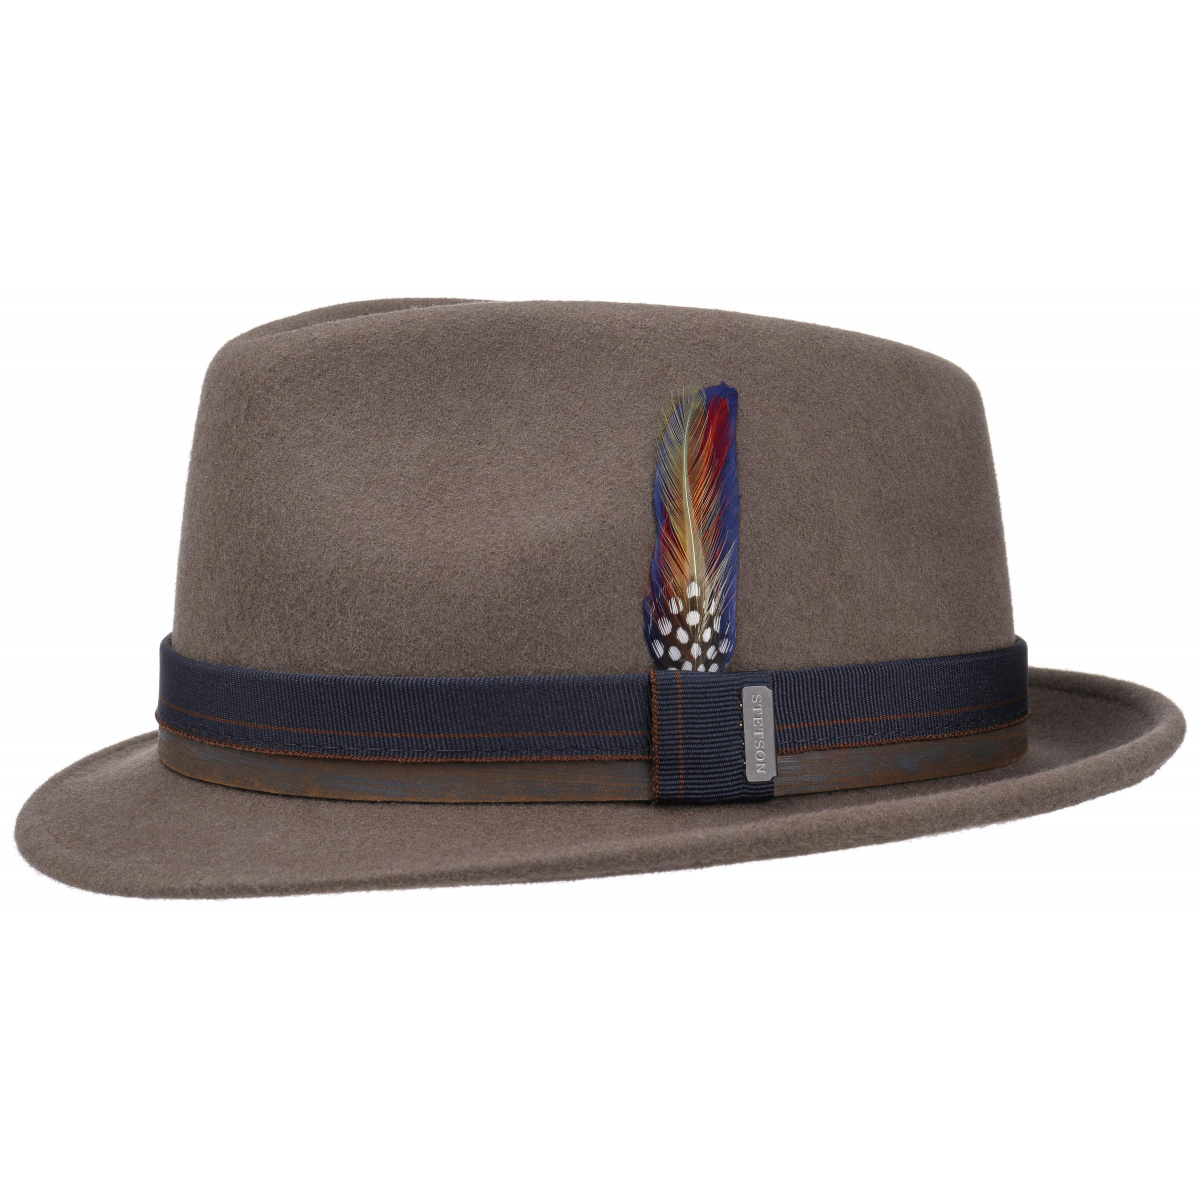 Decato Trilby Mole Hat - Stetson Reference : 8379 | Chapellerie Traclet